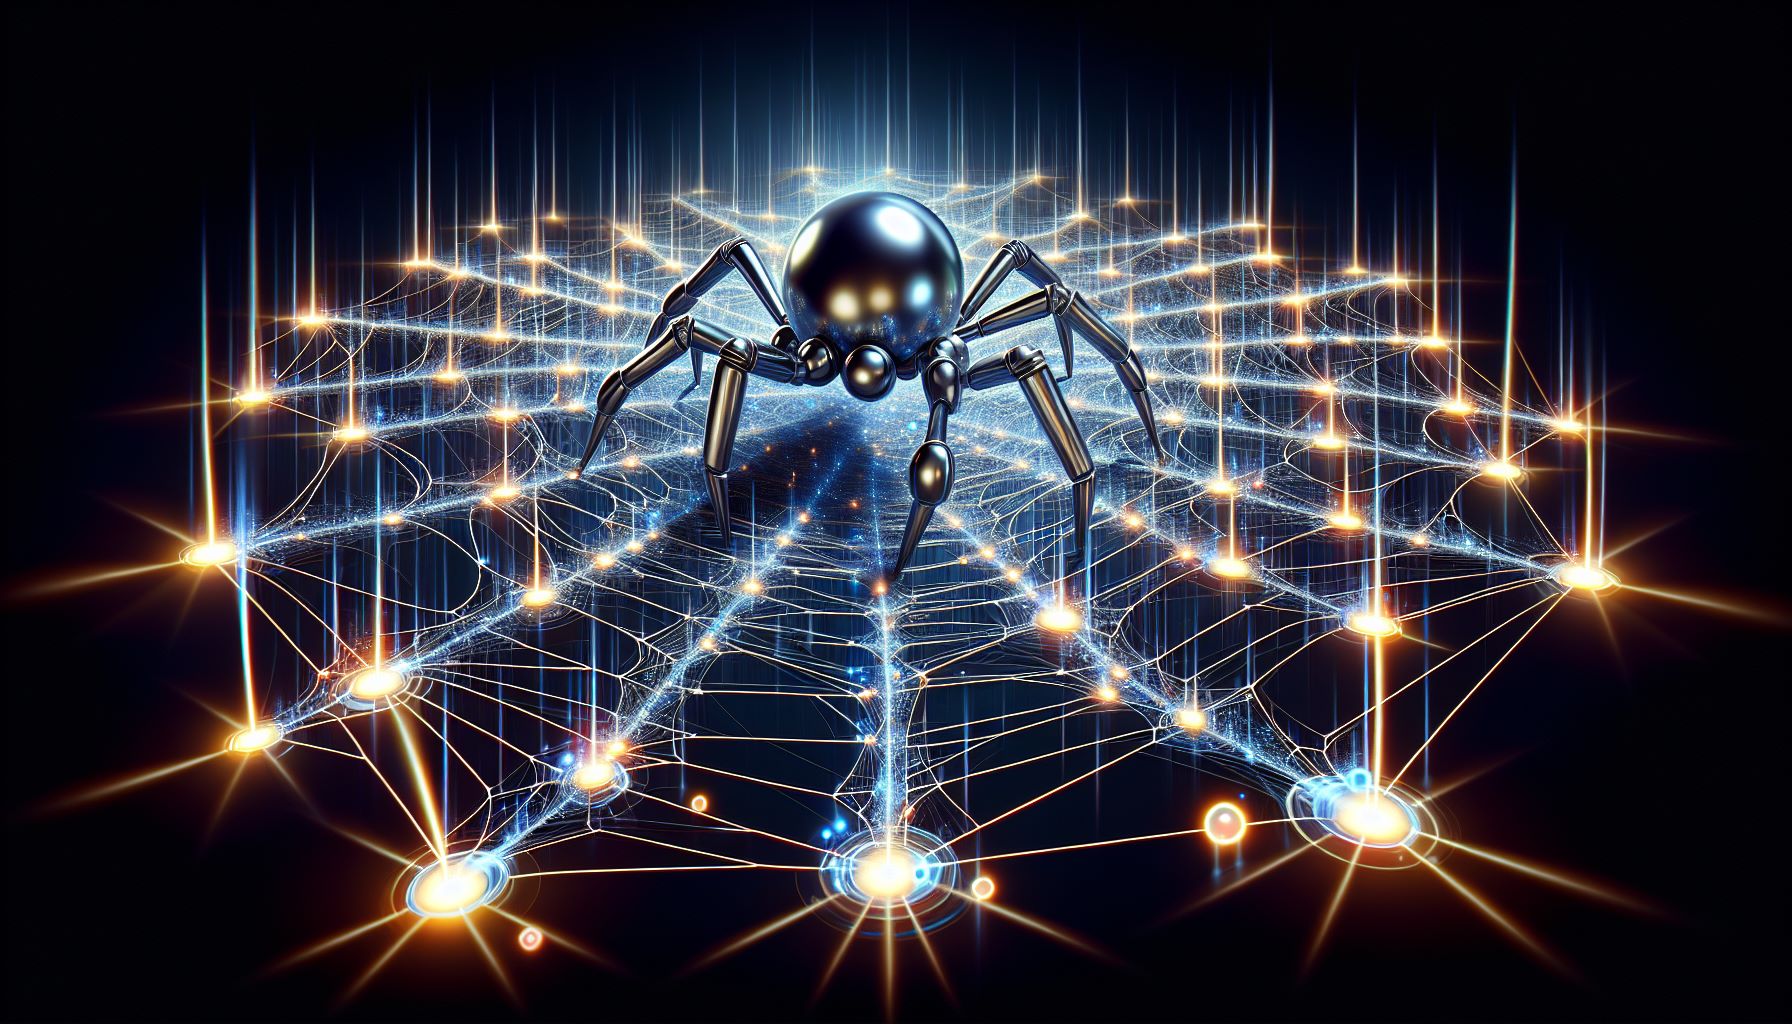 Illustration of a search engine spider crawling a website